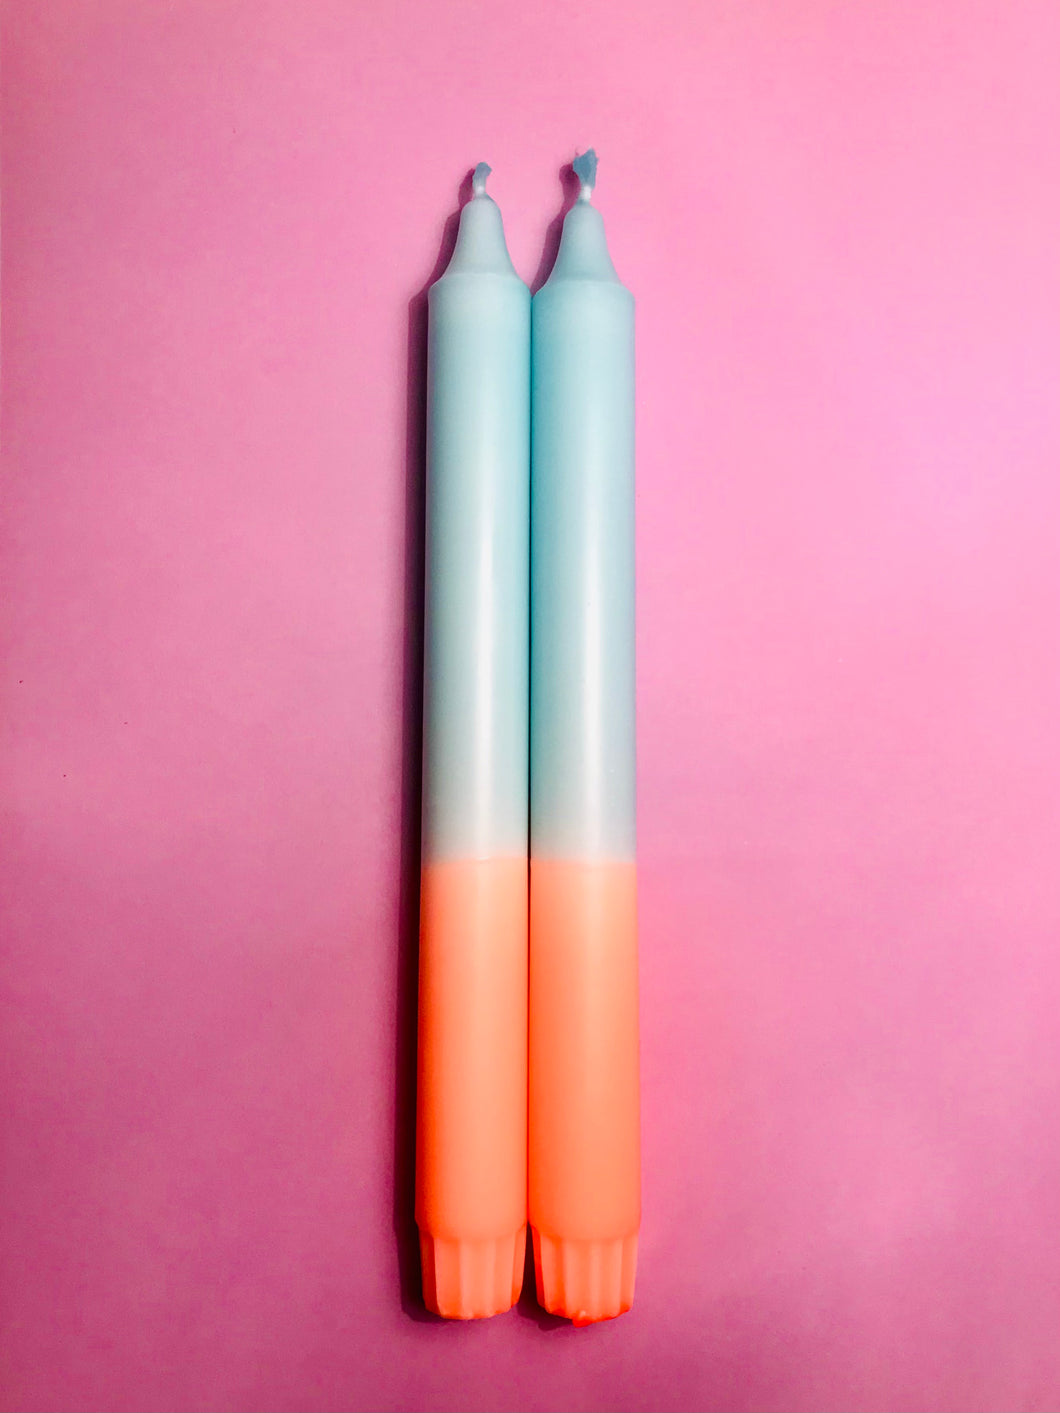 2 candles in blue*pink